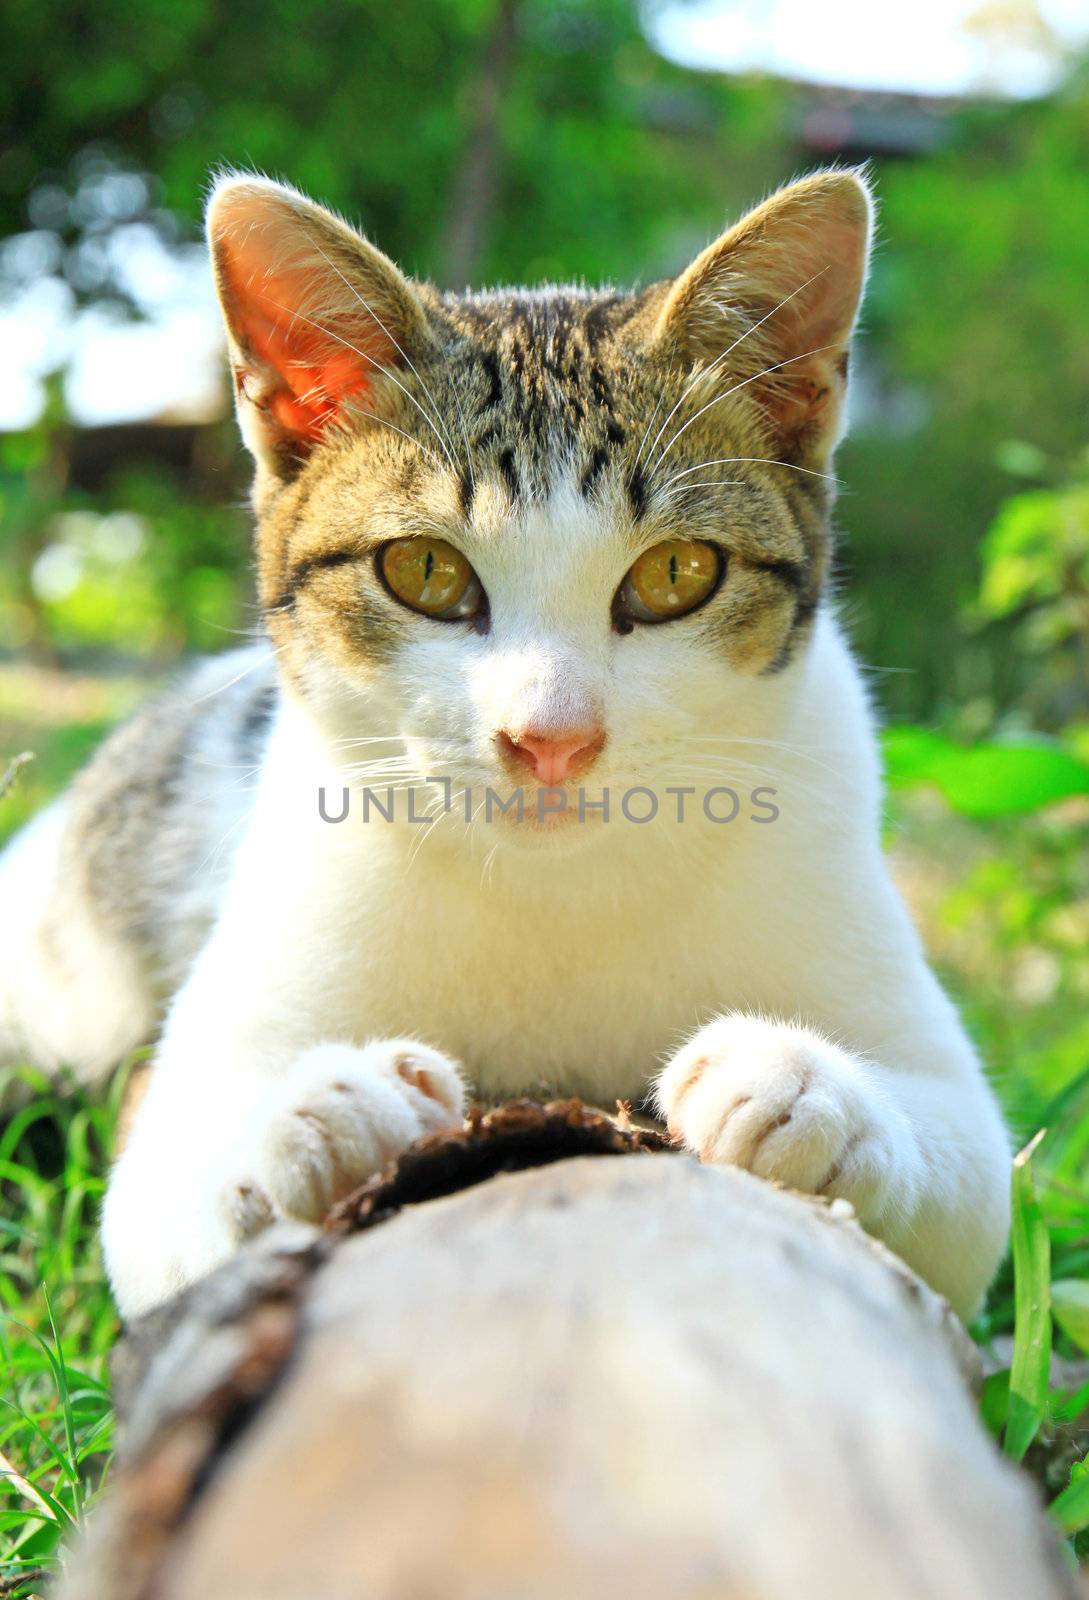 a cute cat lying on log wood in the garden